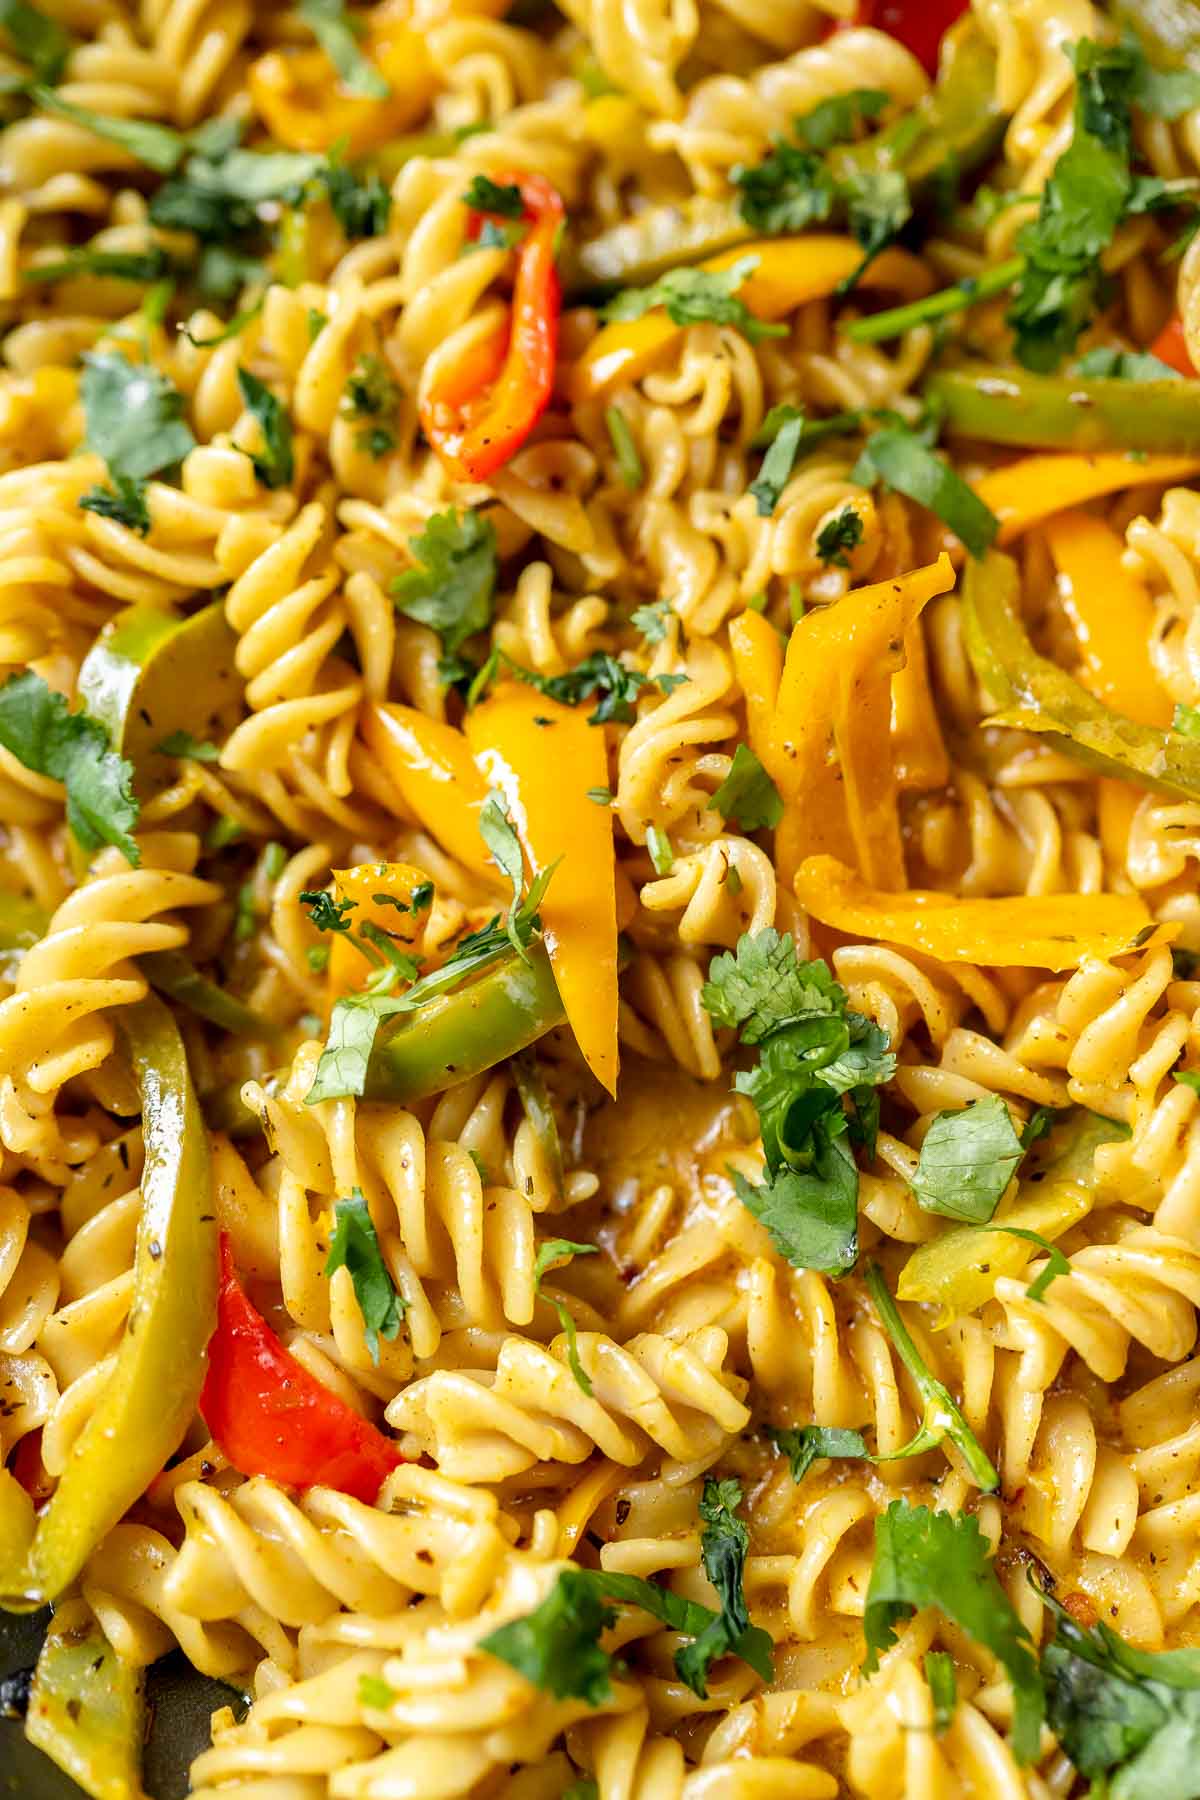 Close shots of creamy yellow noodles topped with sliced bell pepper strips and fresh green herbs.